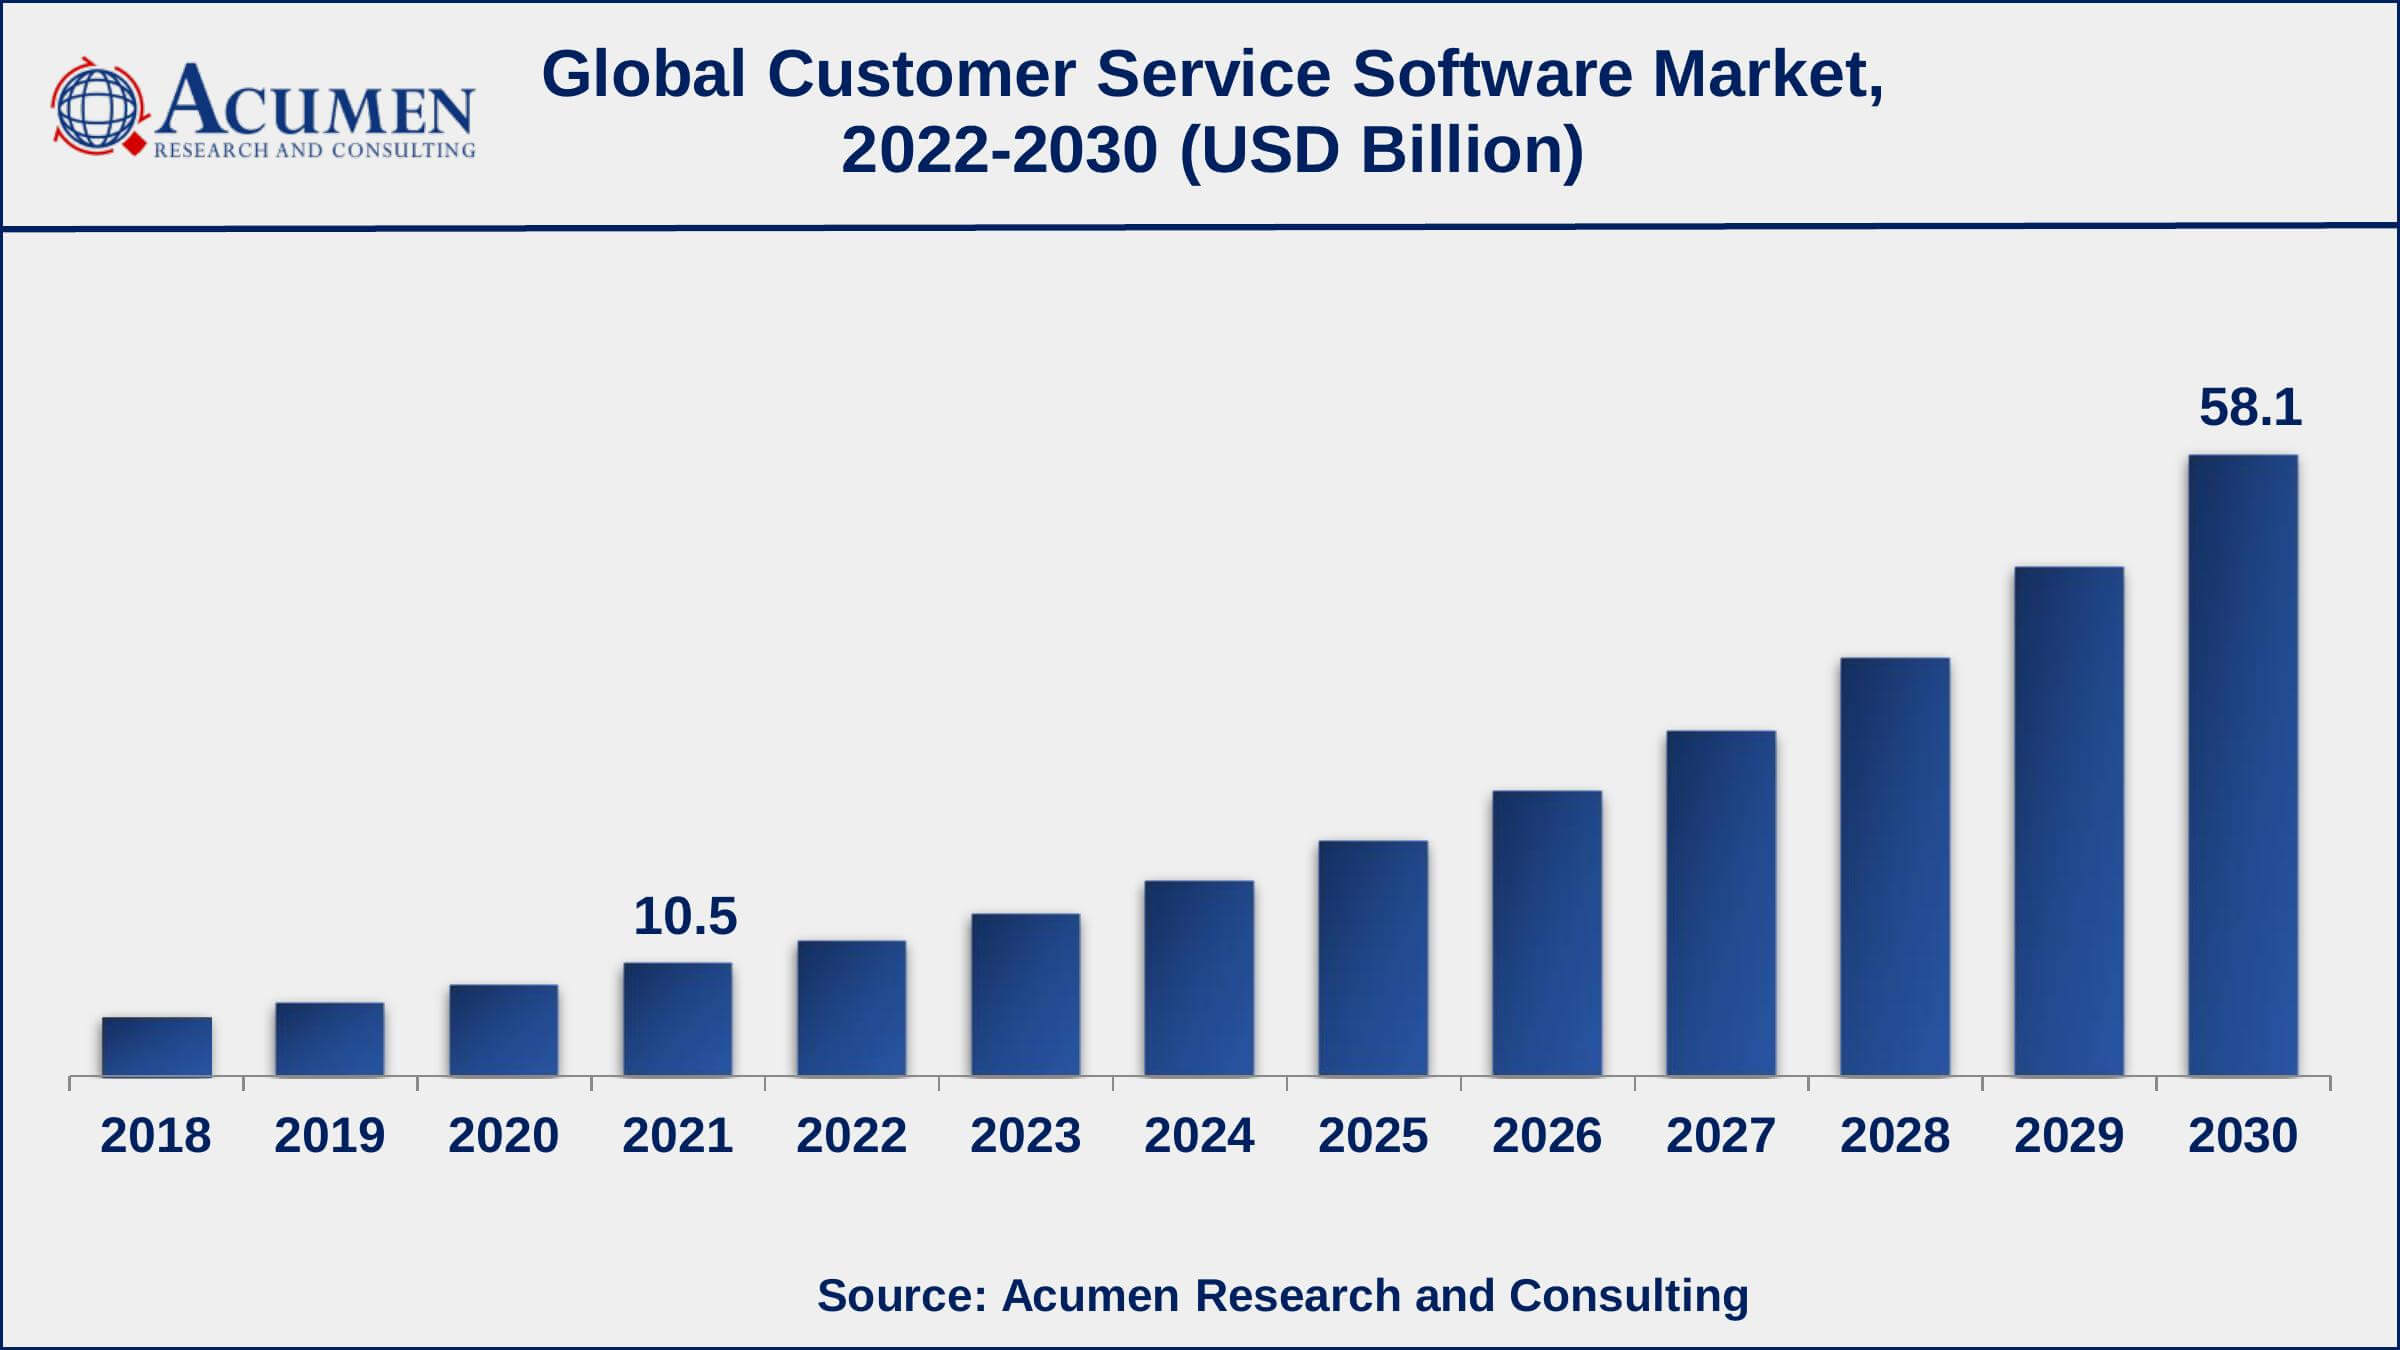 Asia-Pacific customer service software market growth will record a CAGR of more than 22% from 2022 to 2030